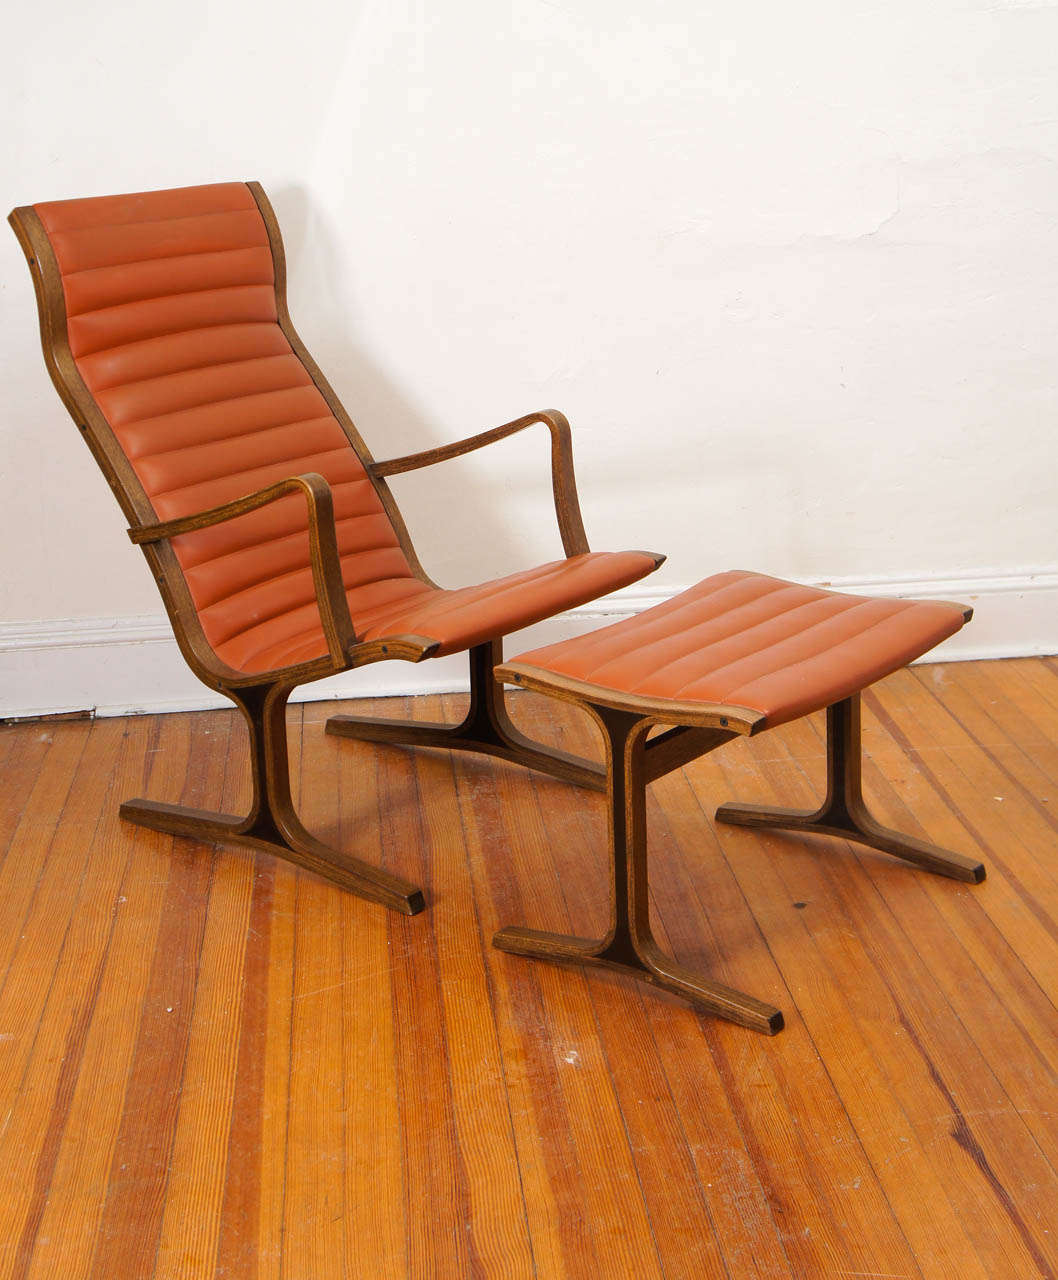 A Kosuga chair and ottoman in walnut in original orange Naugahyde.
Great set for that Dwell type minimalist.
In great condition with light ware.